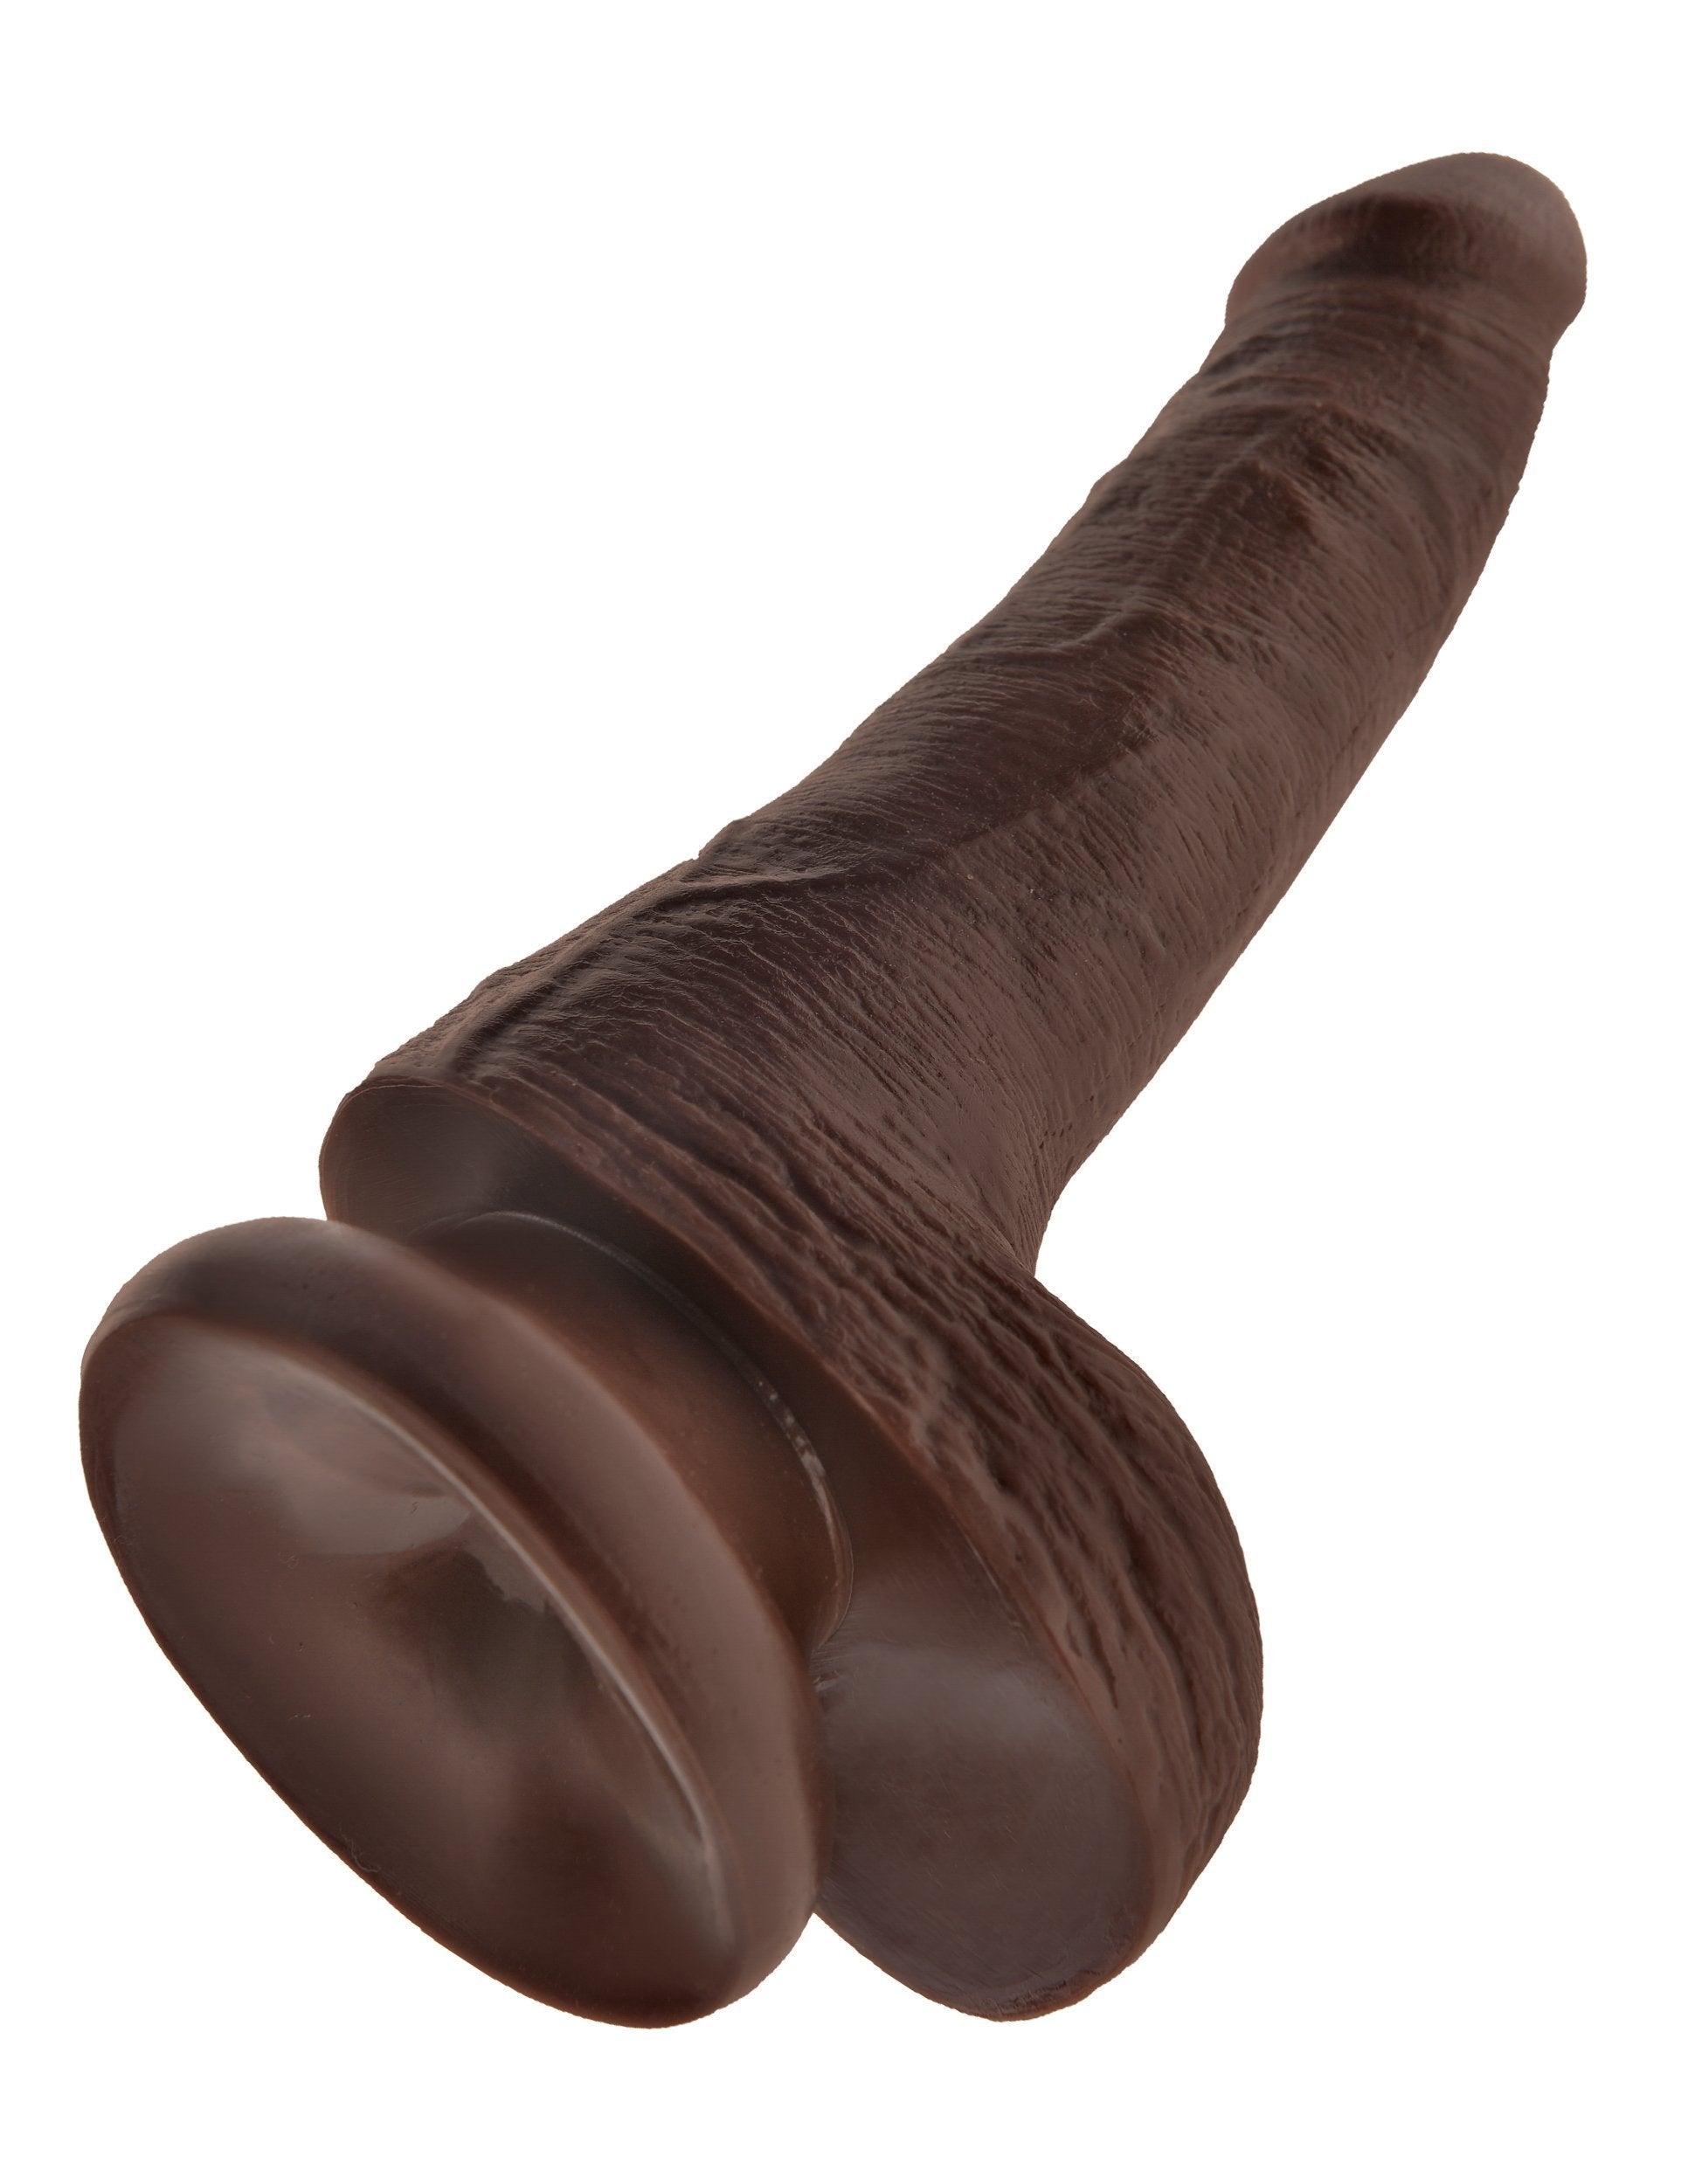 Pipedream - King Cock 6" Cock with Balls (Dark Brown) Realistic Dildo with suction cup (Non Vibration) Singapore